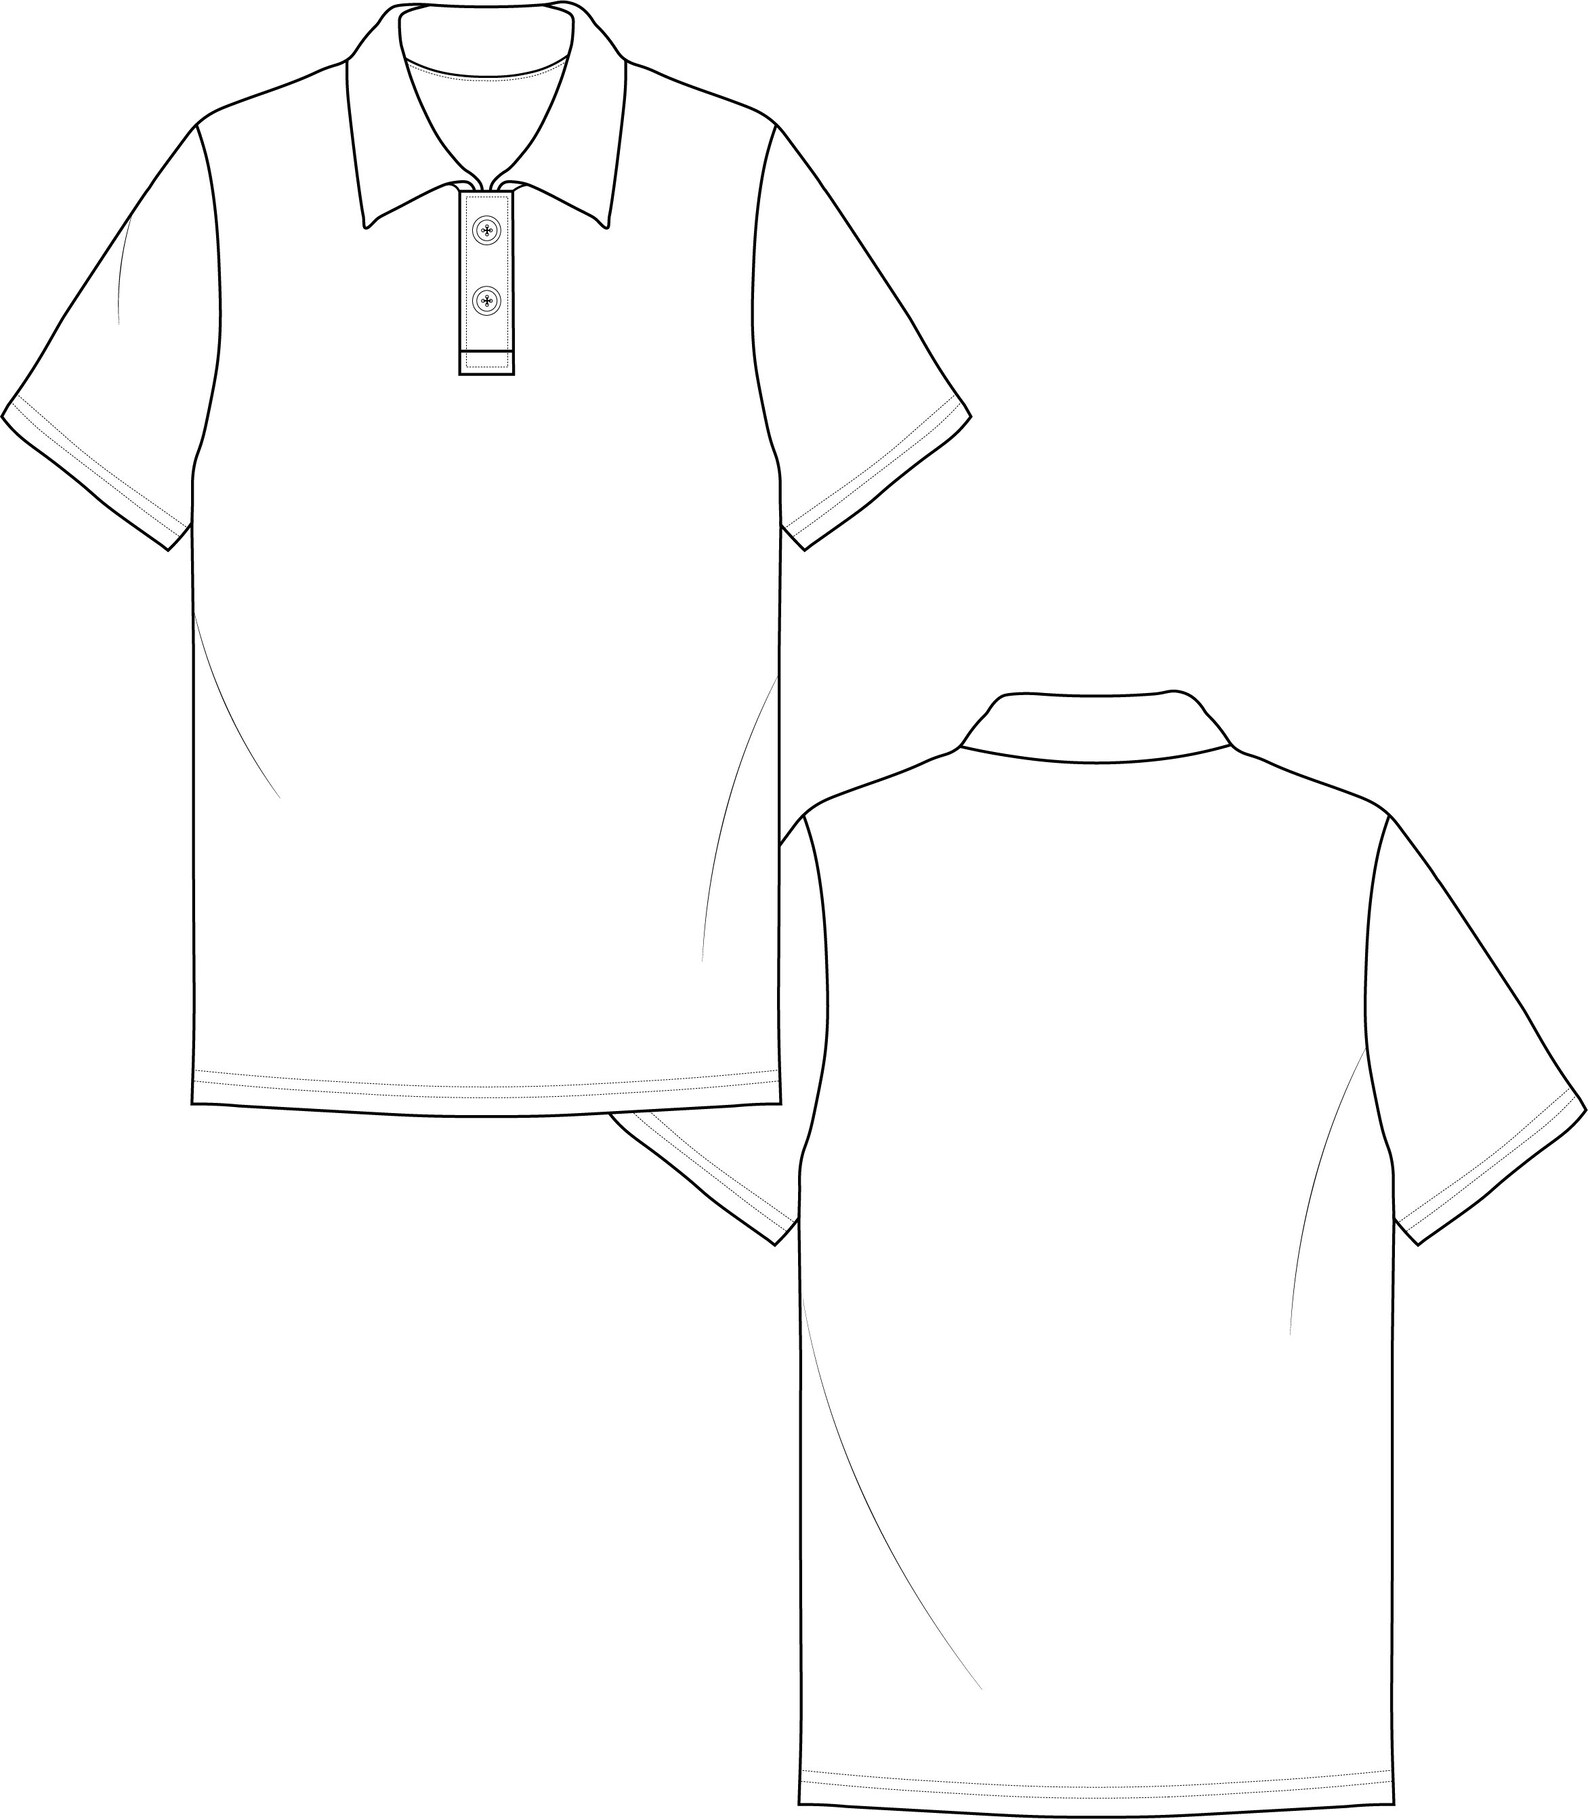 Polo Shirt Fashion Flat Technical Drawing Download - Etsy